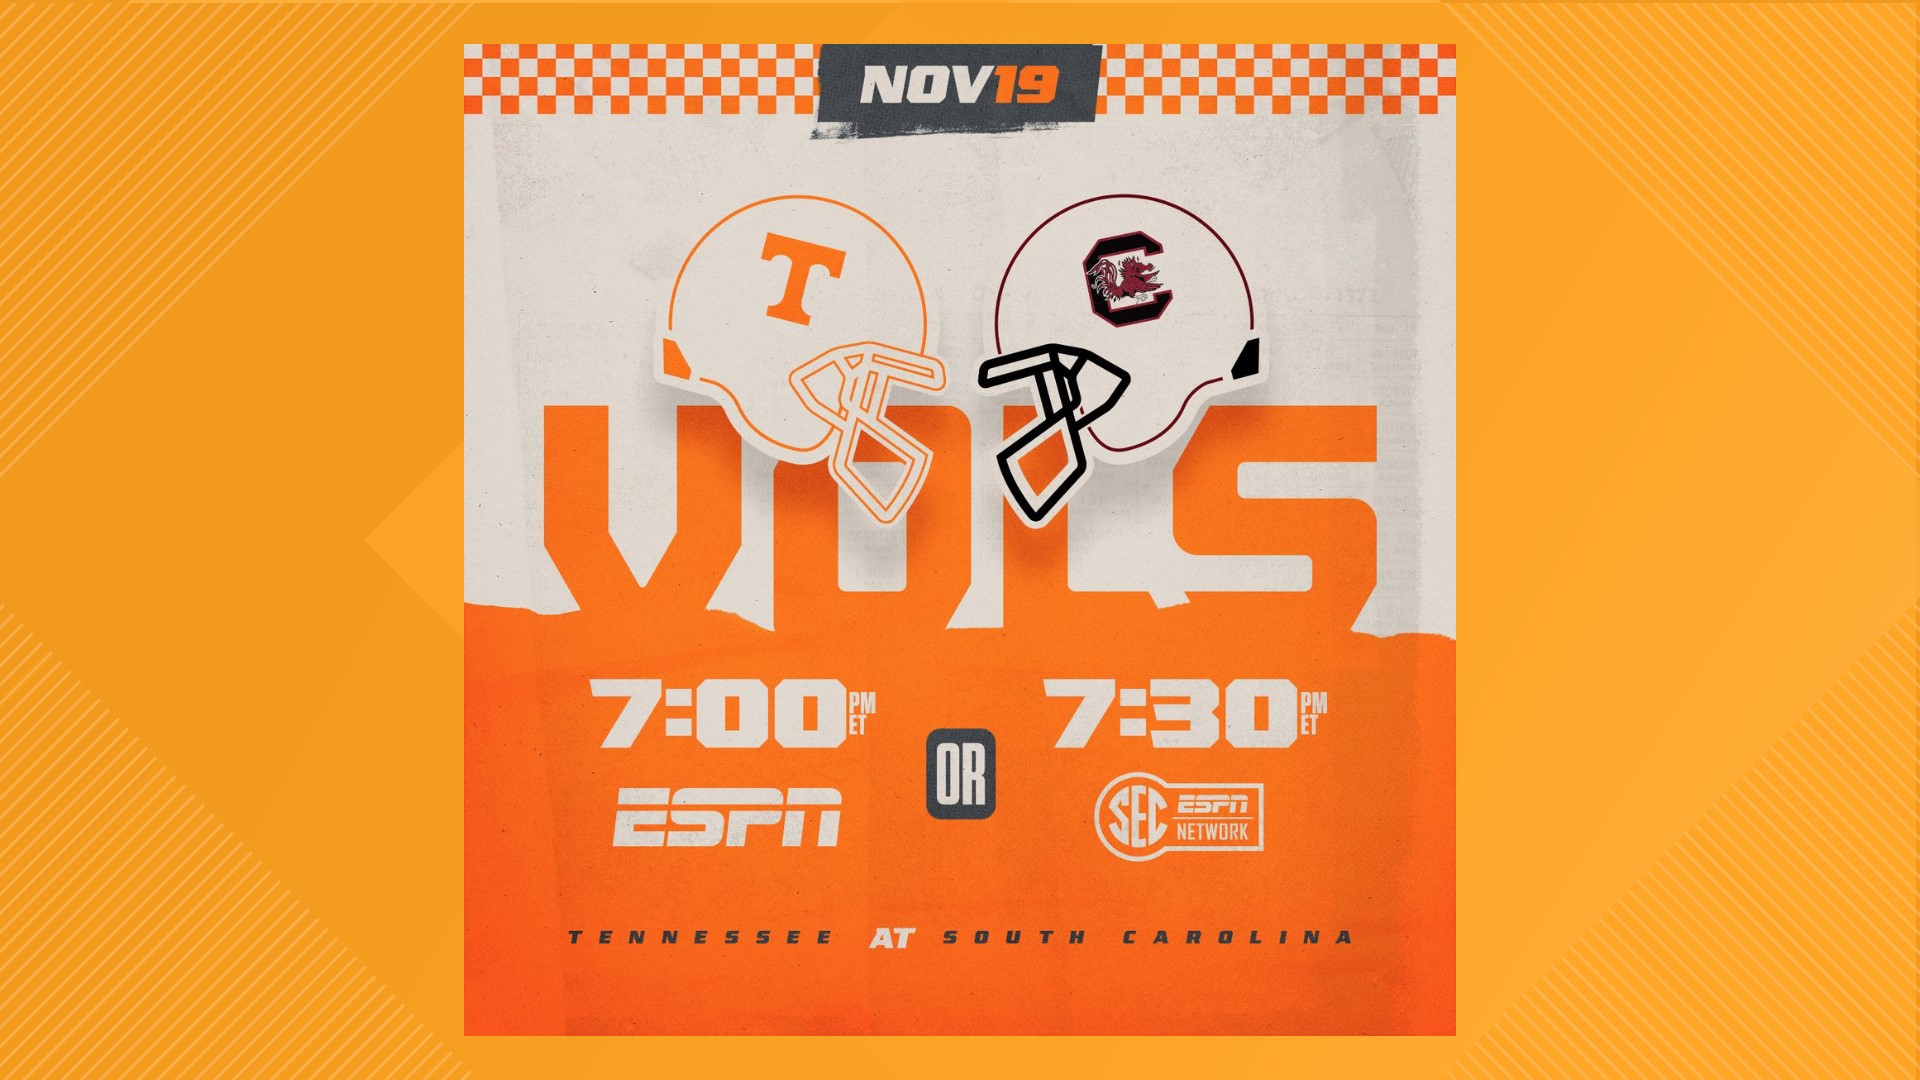 Kickoff time announced for Tennessee vs. South Carolina